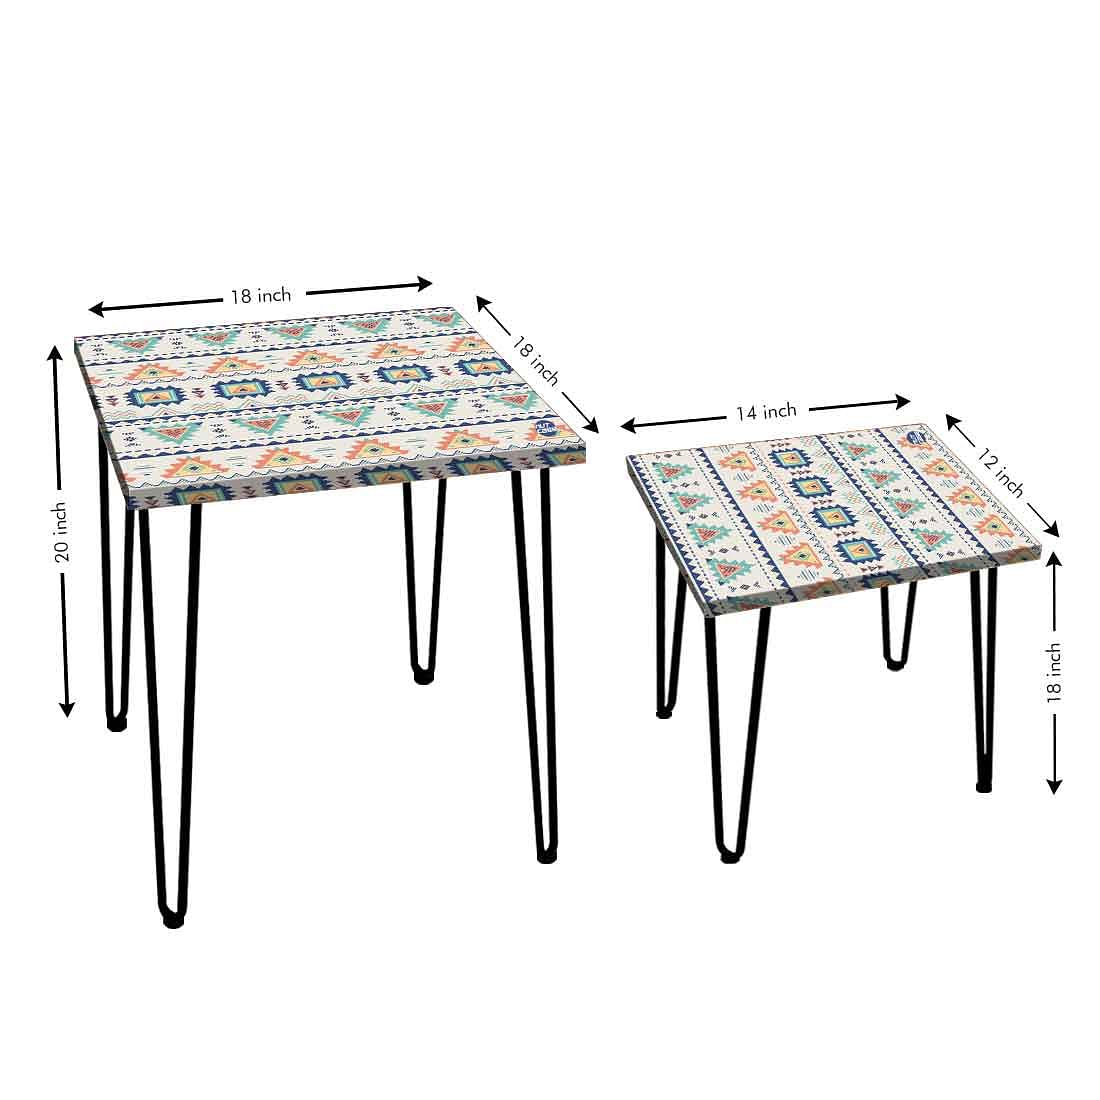 Multi-usable Nest of 2-Coffee Tables For Living Room, Bedroom and Patio - Aztec Grey Pattern Nutcase